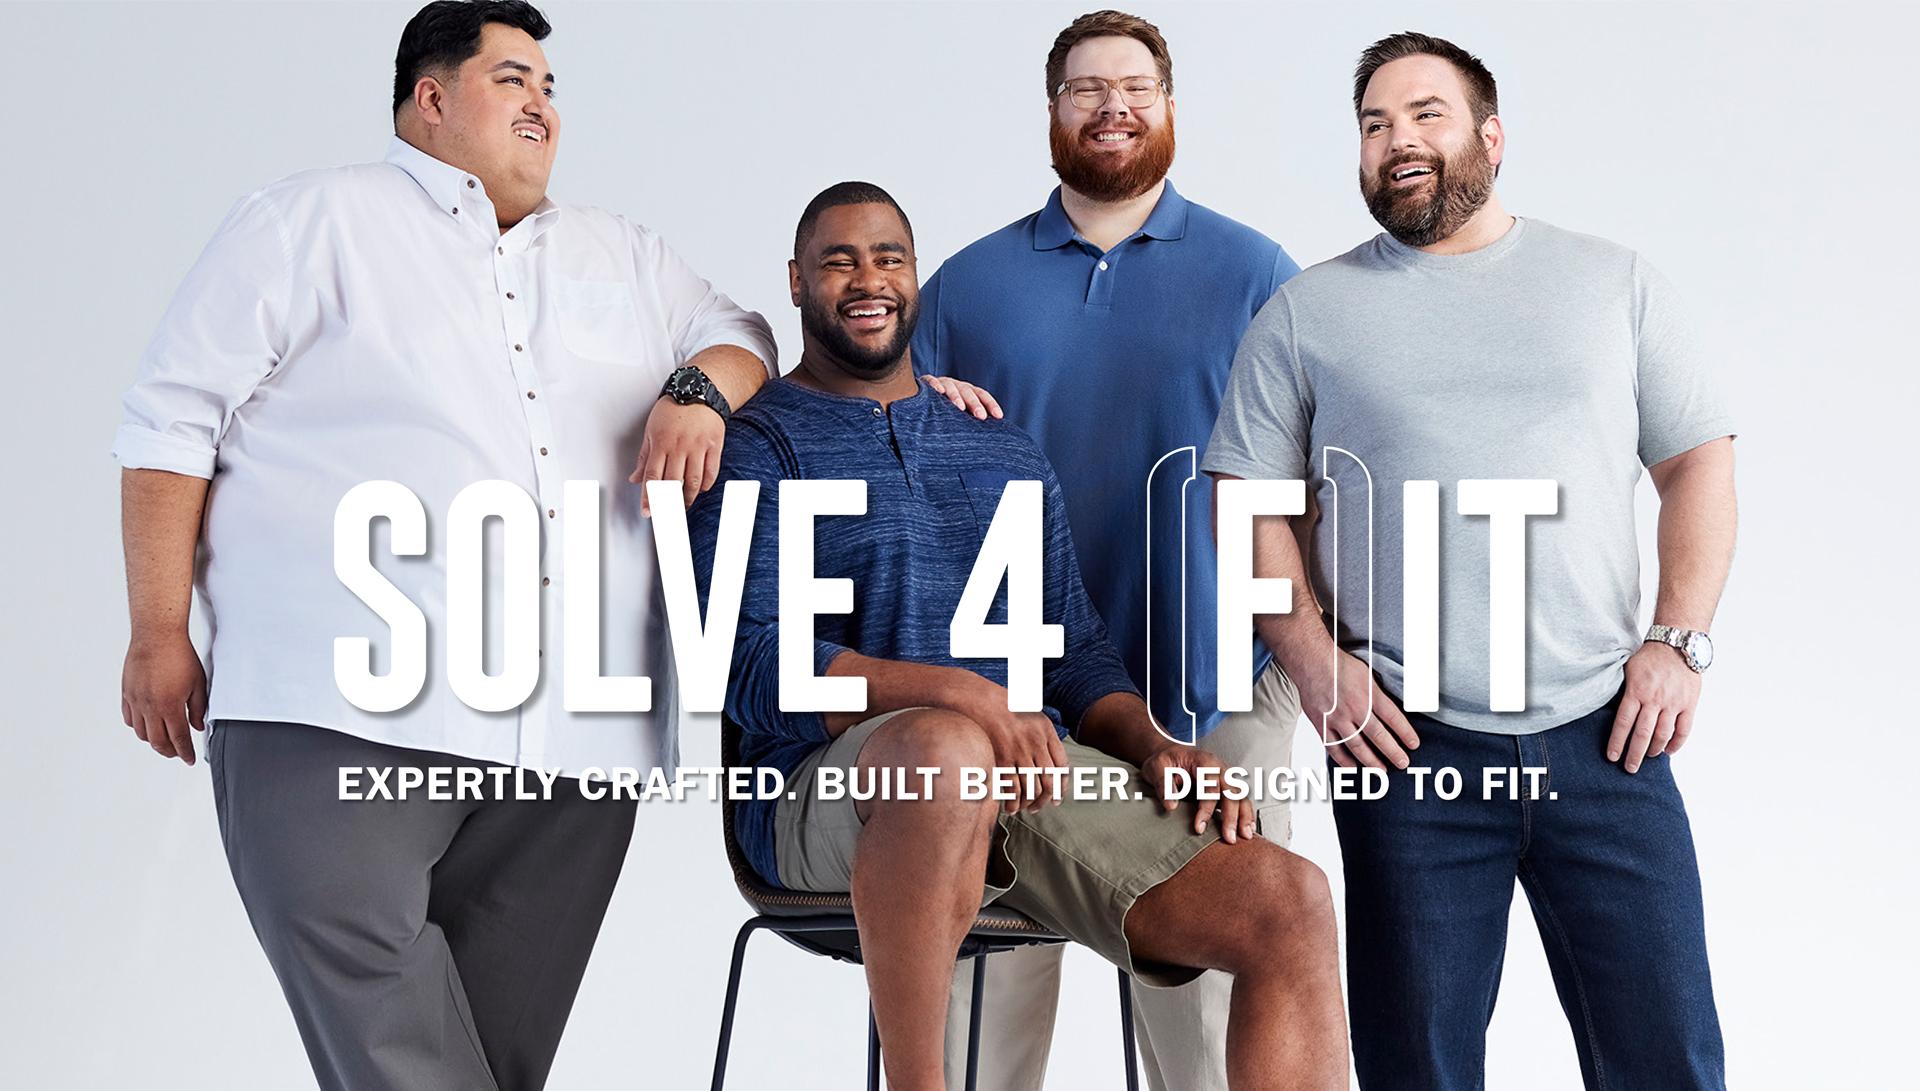 SOLVE FOR FIT | EXPERTLY CRAFTED. BUILT BETTER. DESIGNED TO FIT.